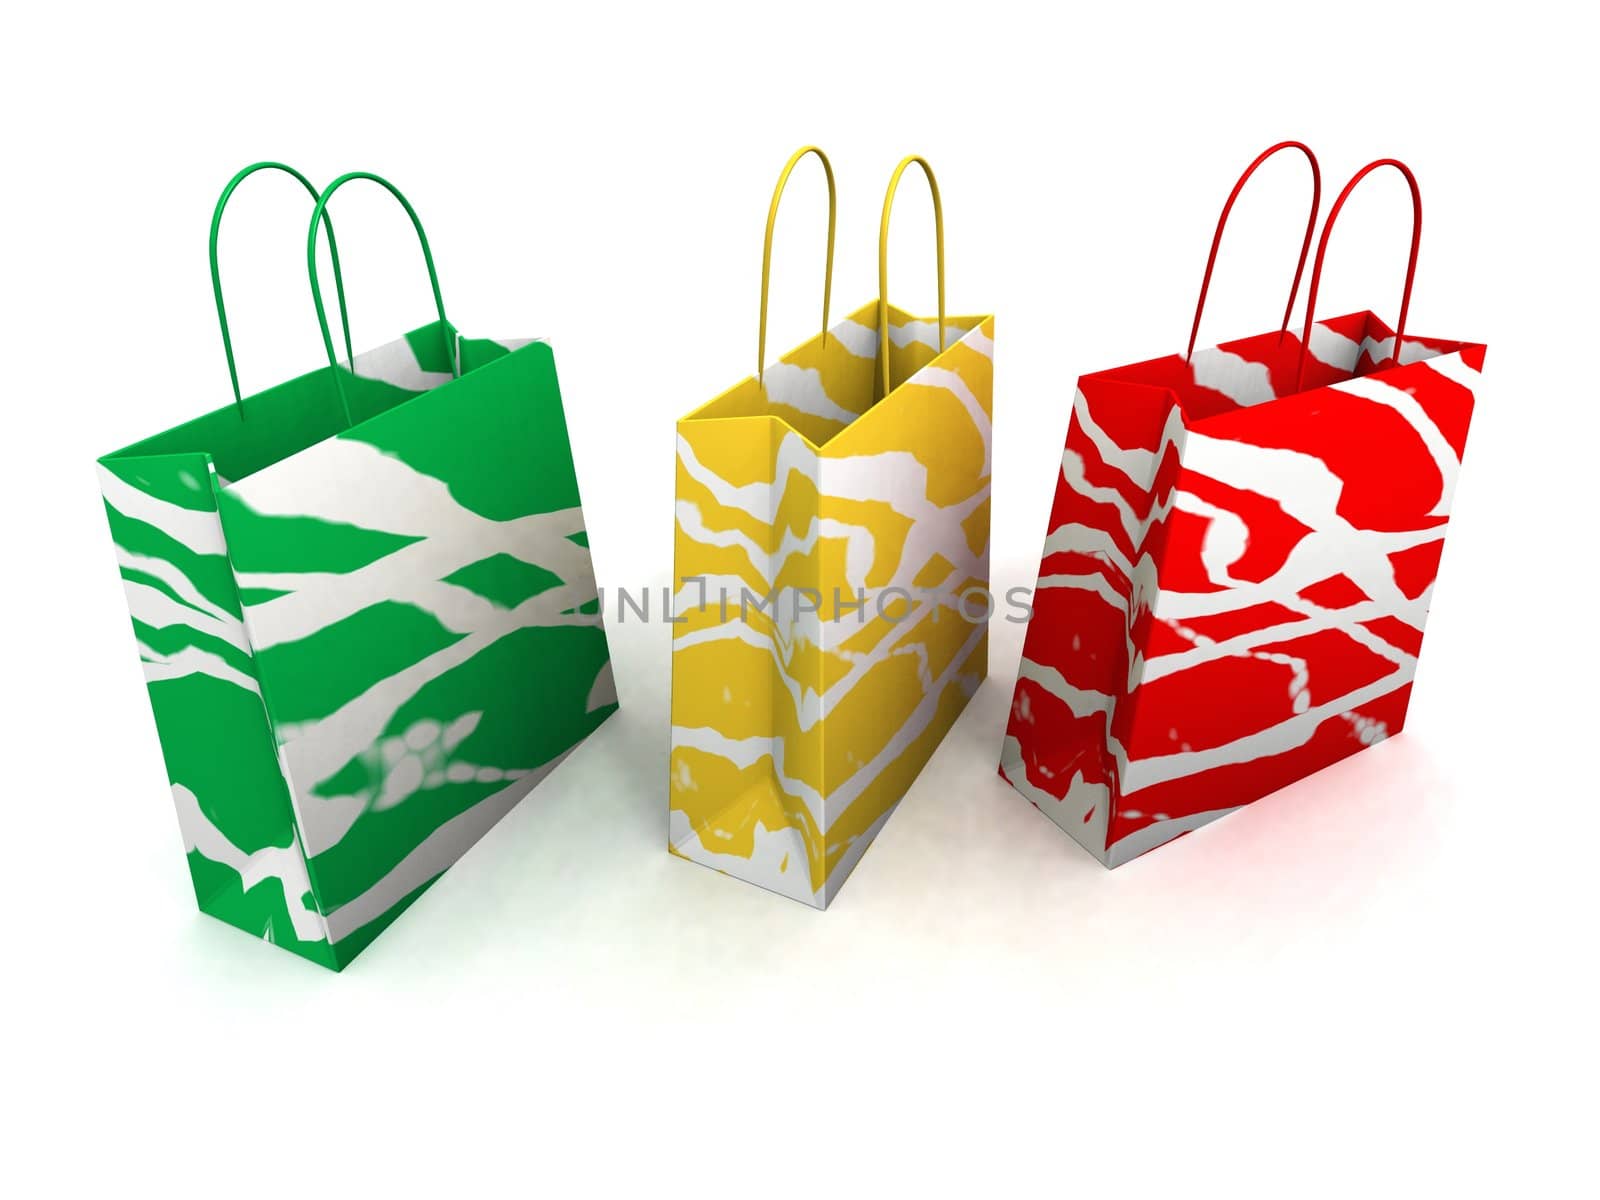 a 3d rendering of some shopping bags